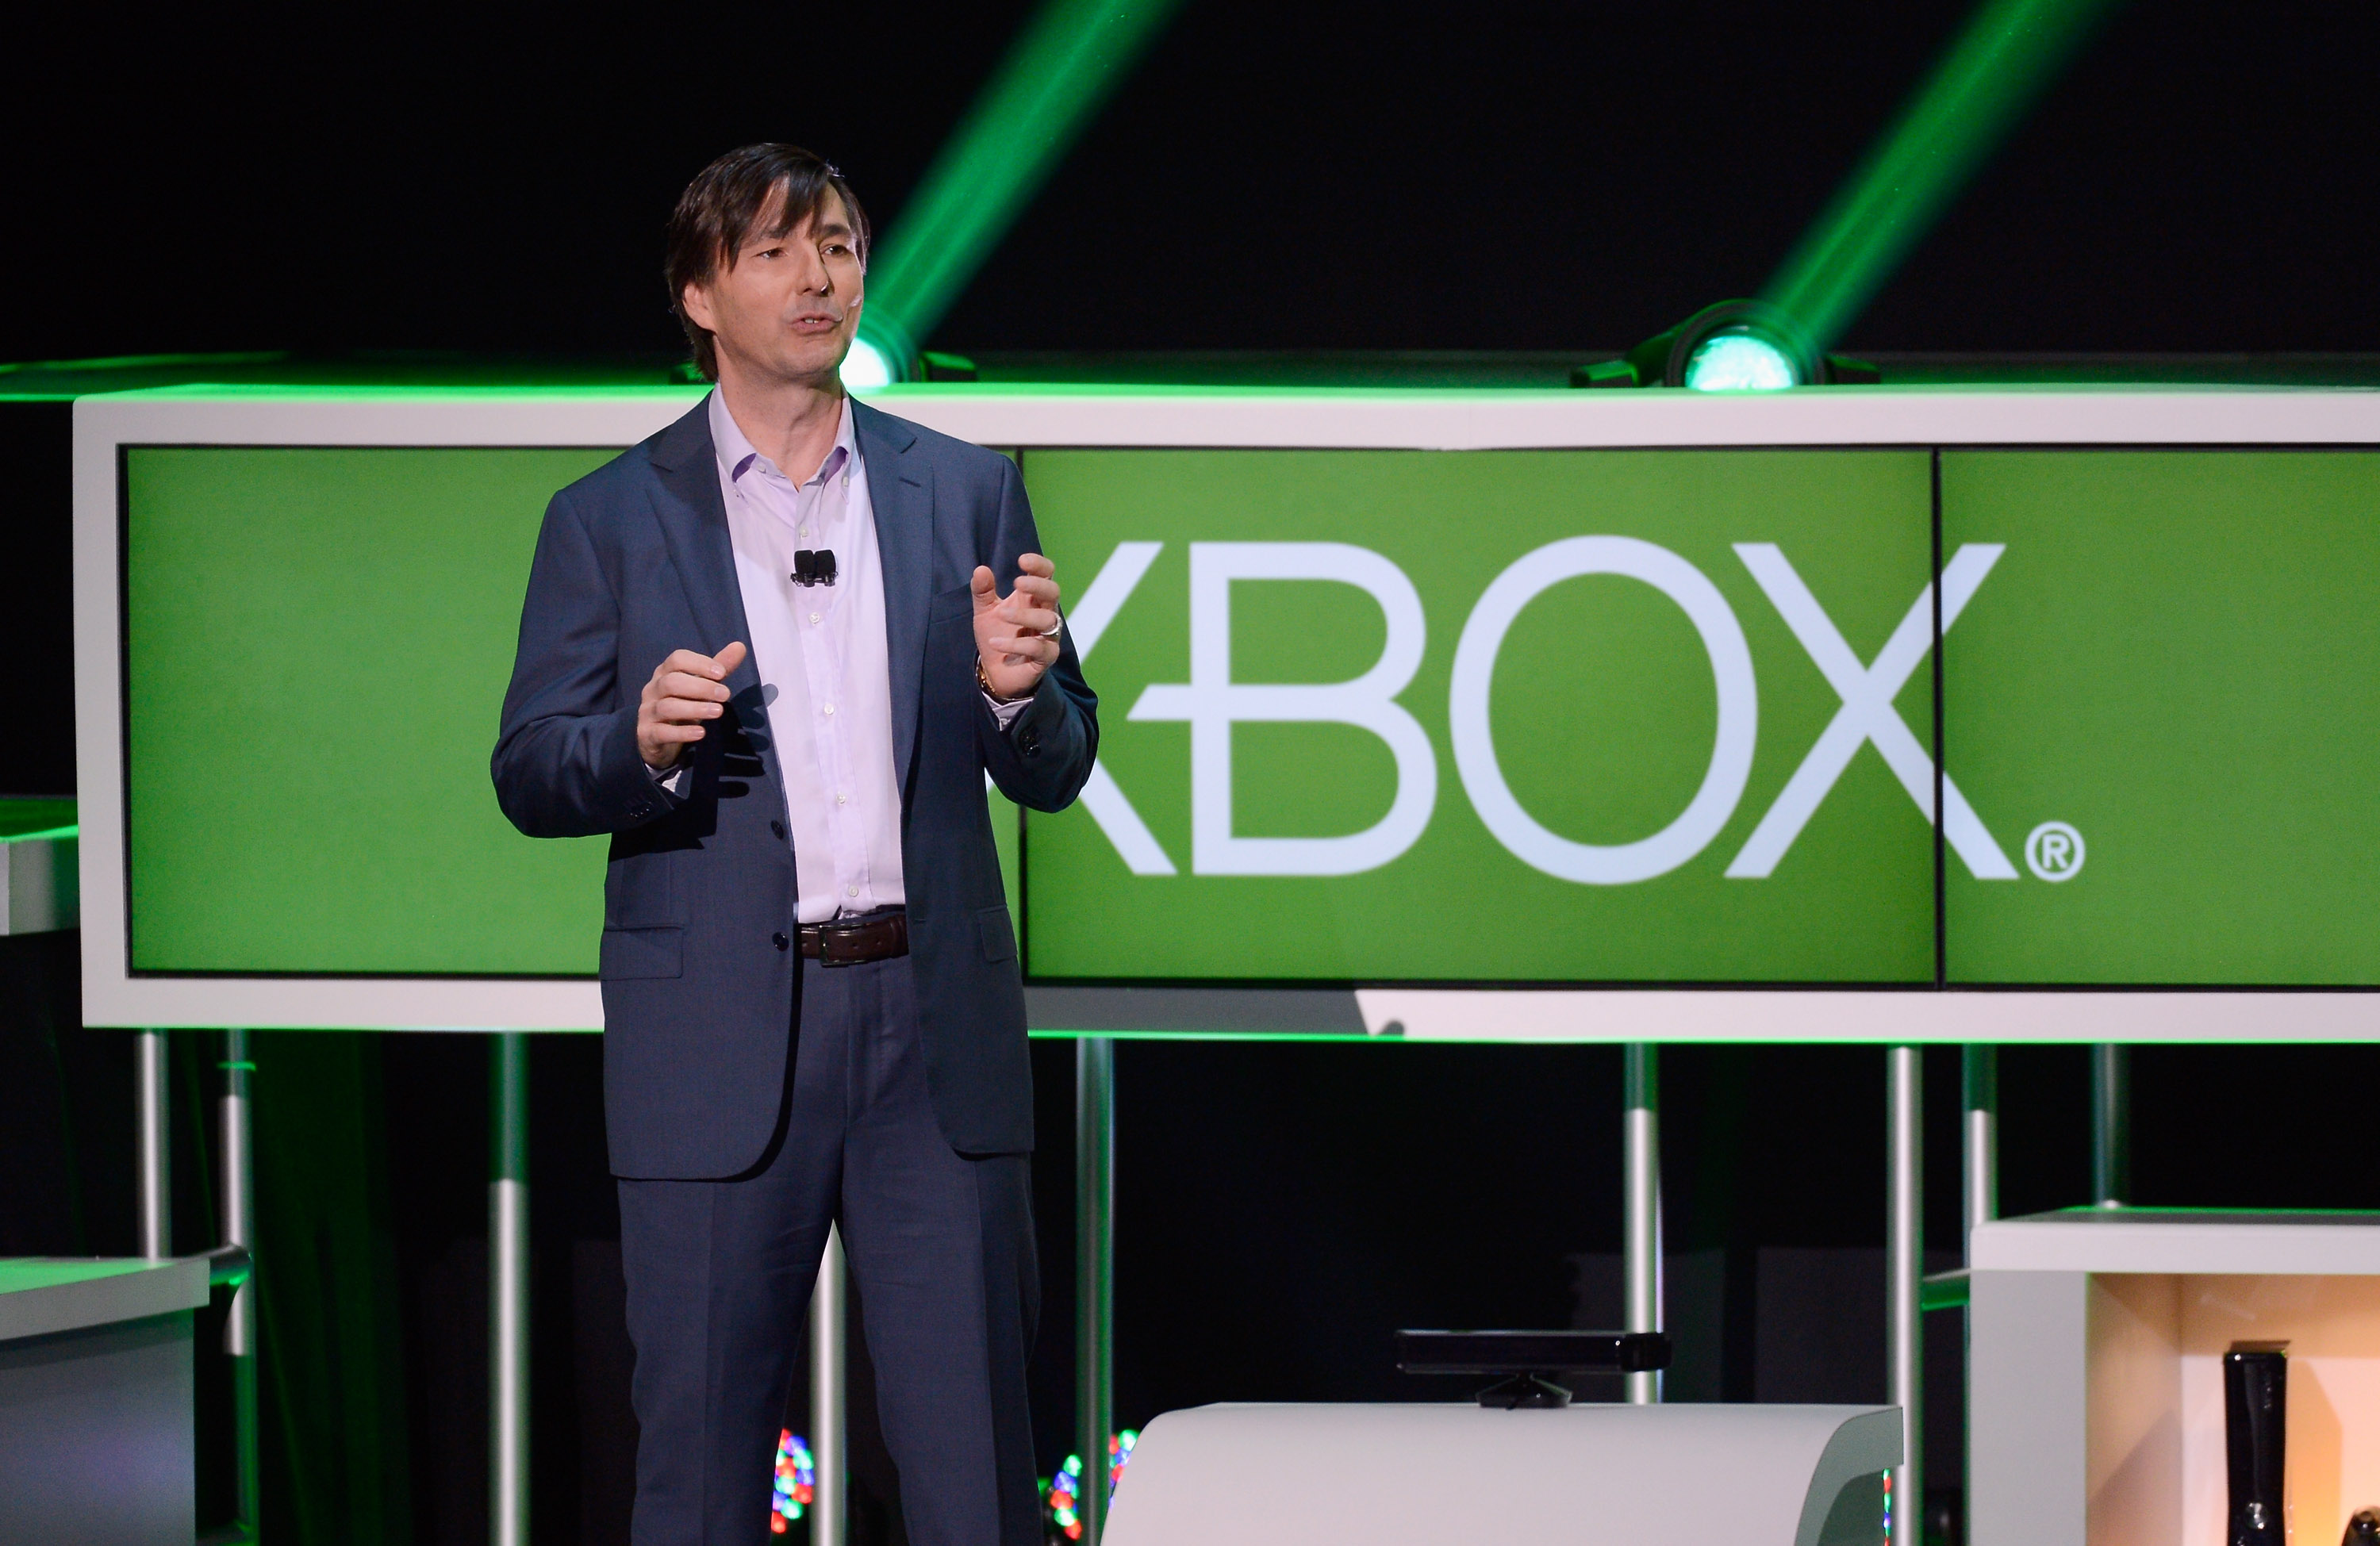 Microsoft Holds News Briefing Ahead Of E3 Conference